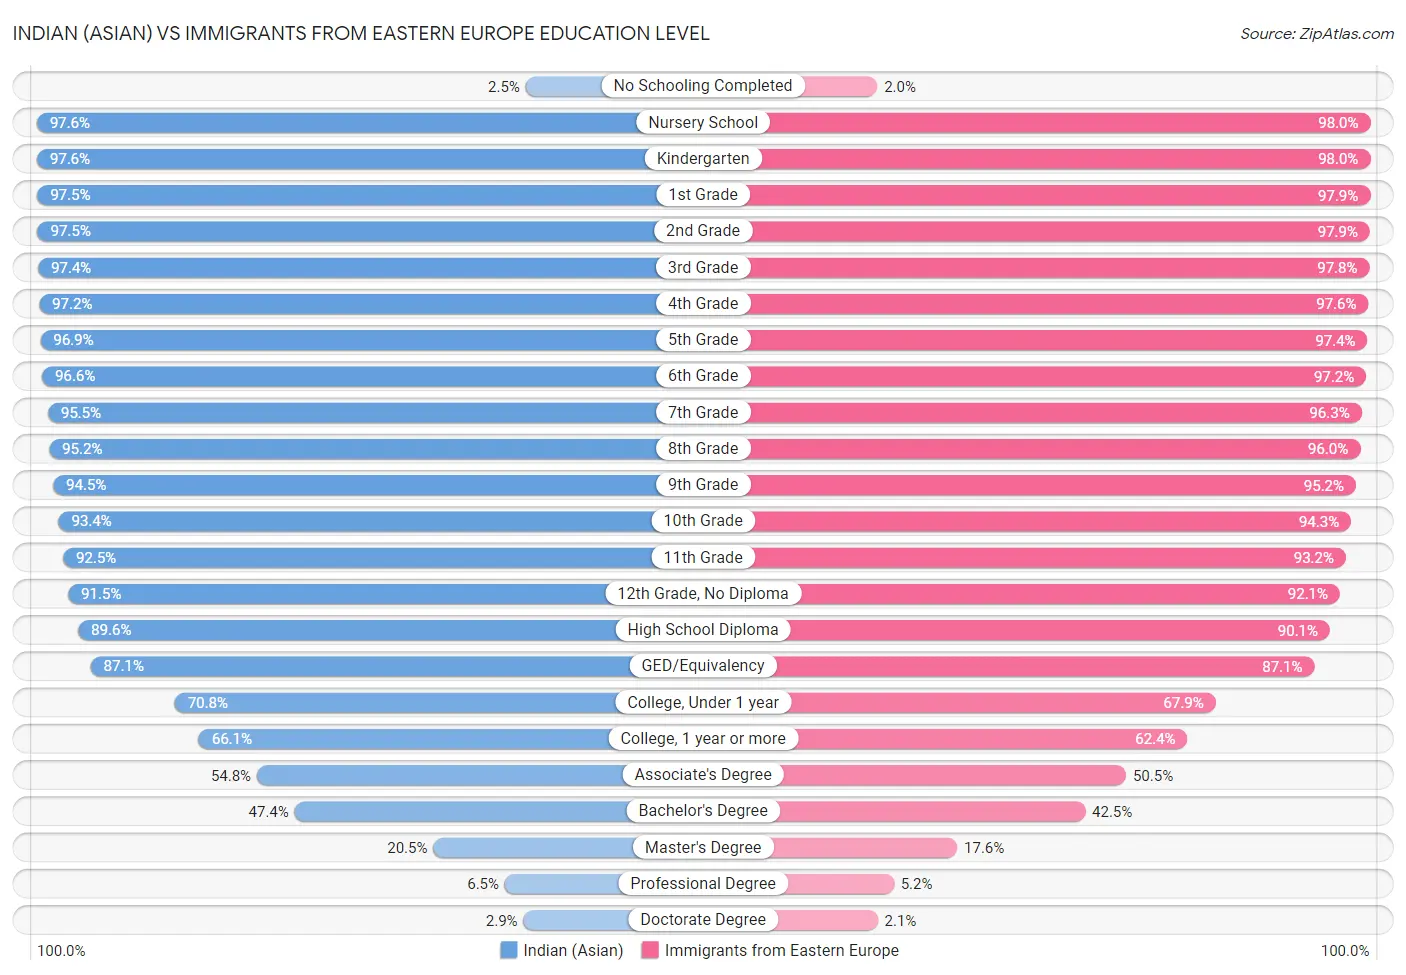 Indian (Asian) vs Immigrants from Eastern Europe Education Level